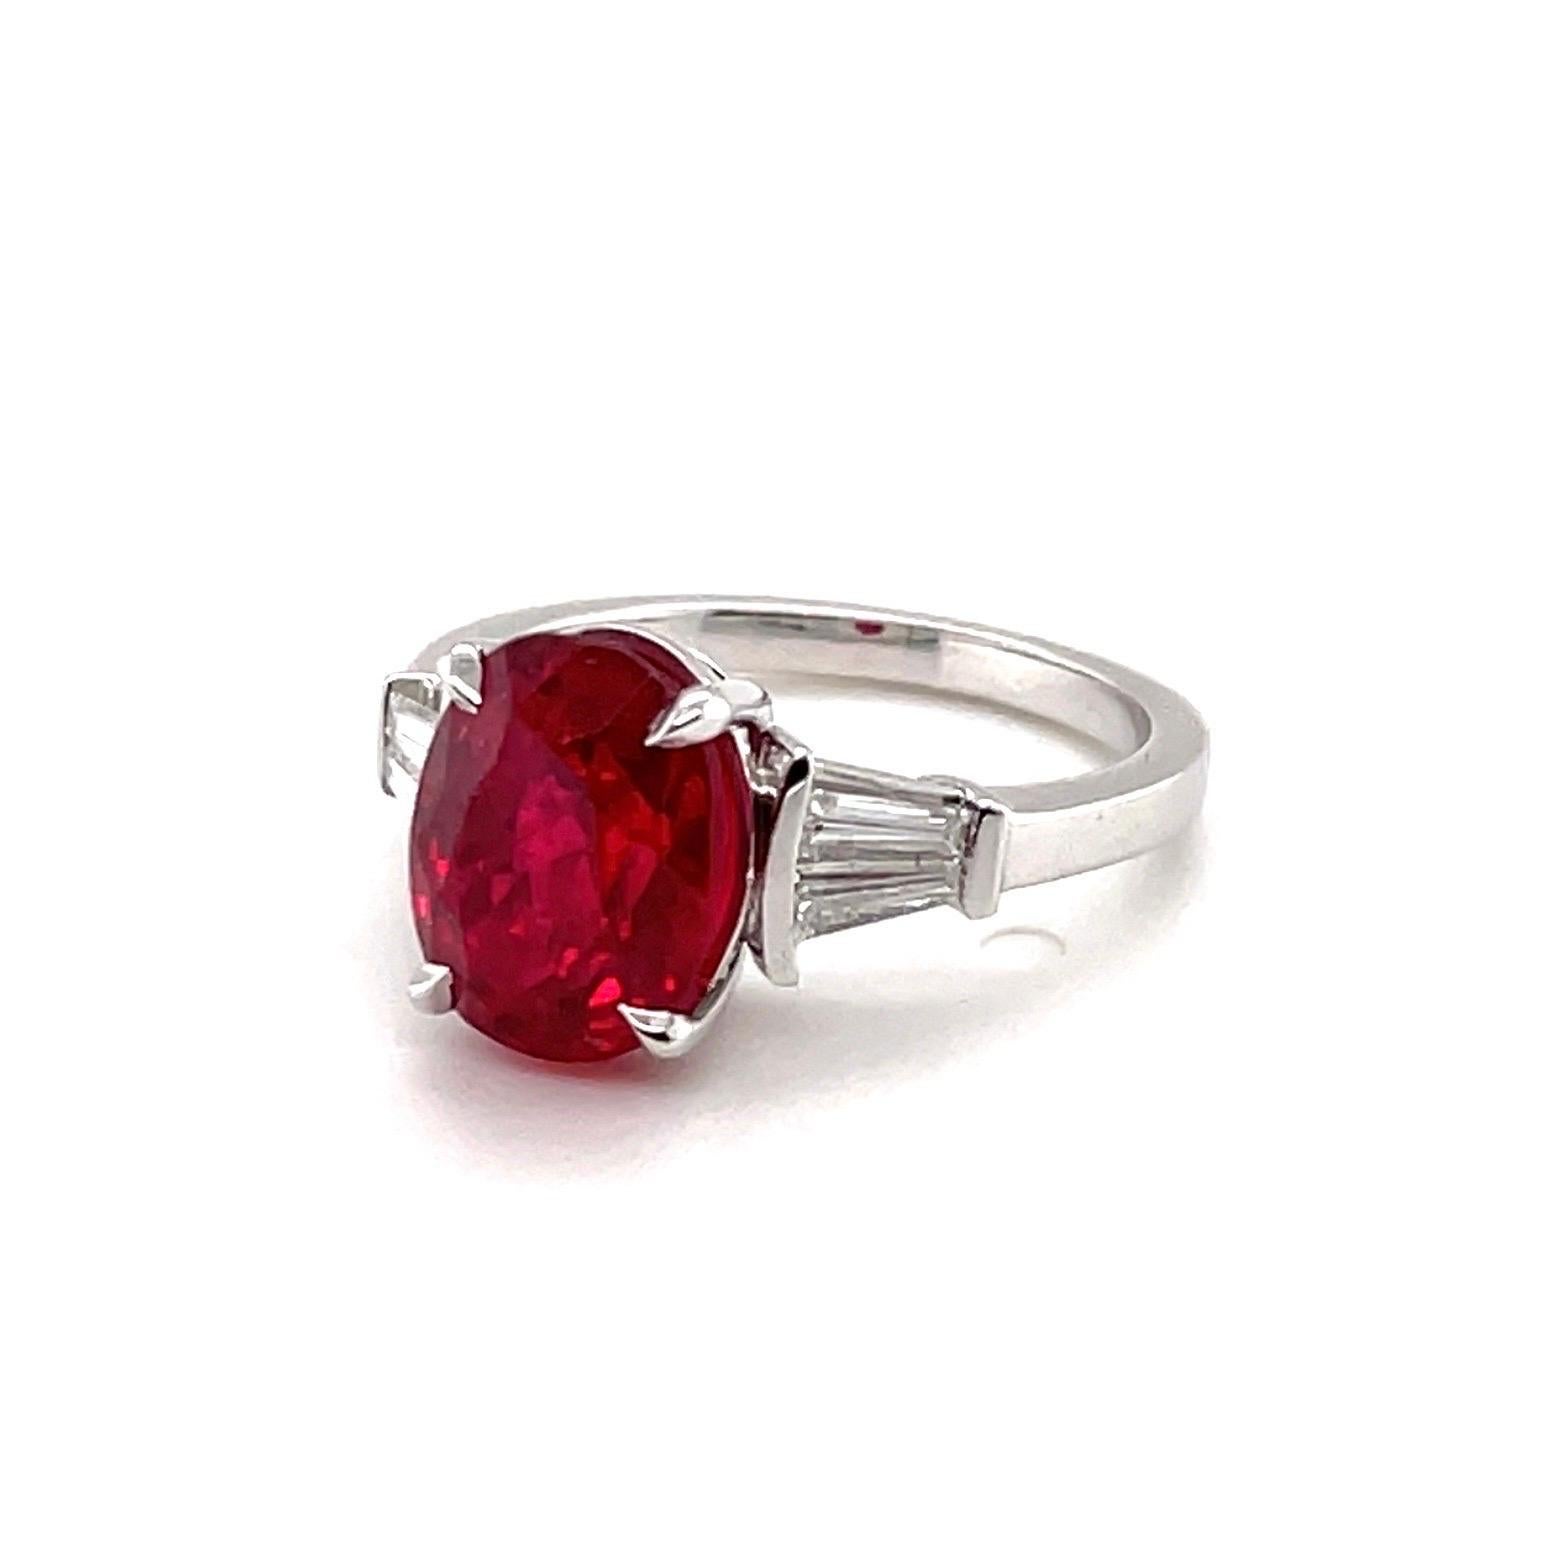 Oval Cut SSEF Certified 3.39 Carats Red Burma Spinel and Diamond 18 Karat White Gold Ring For Sale